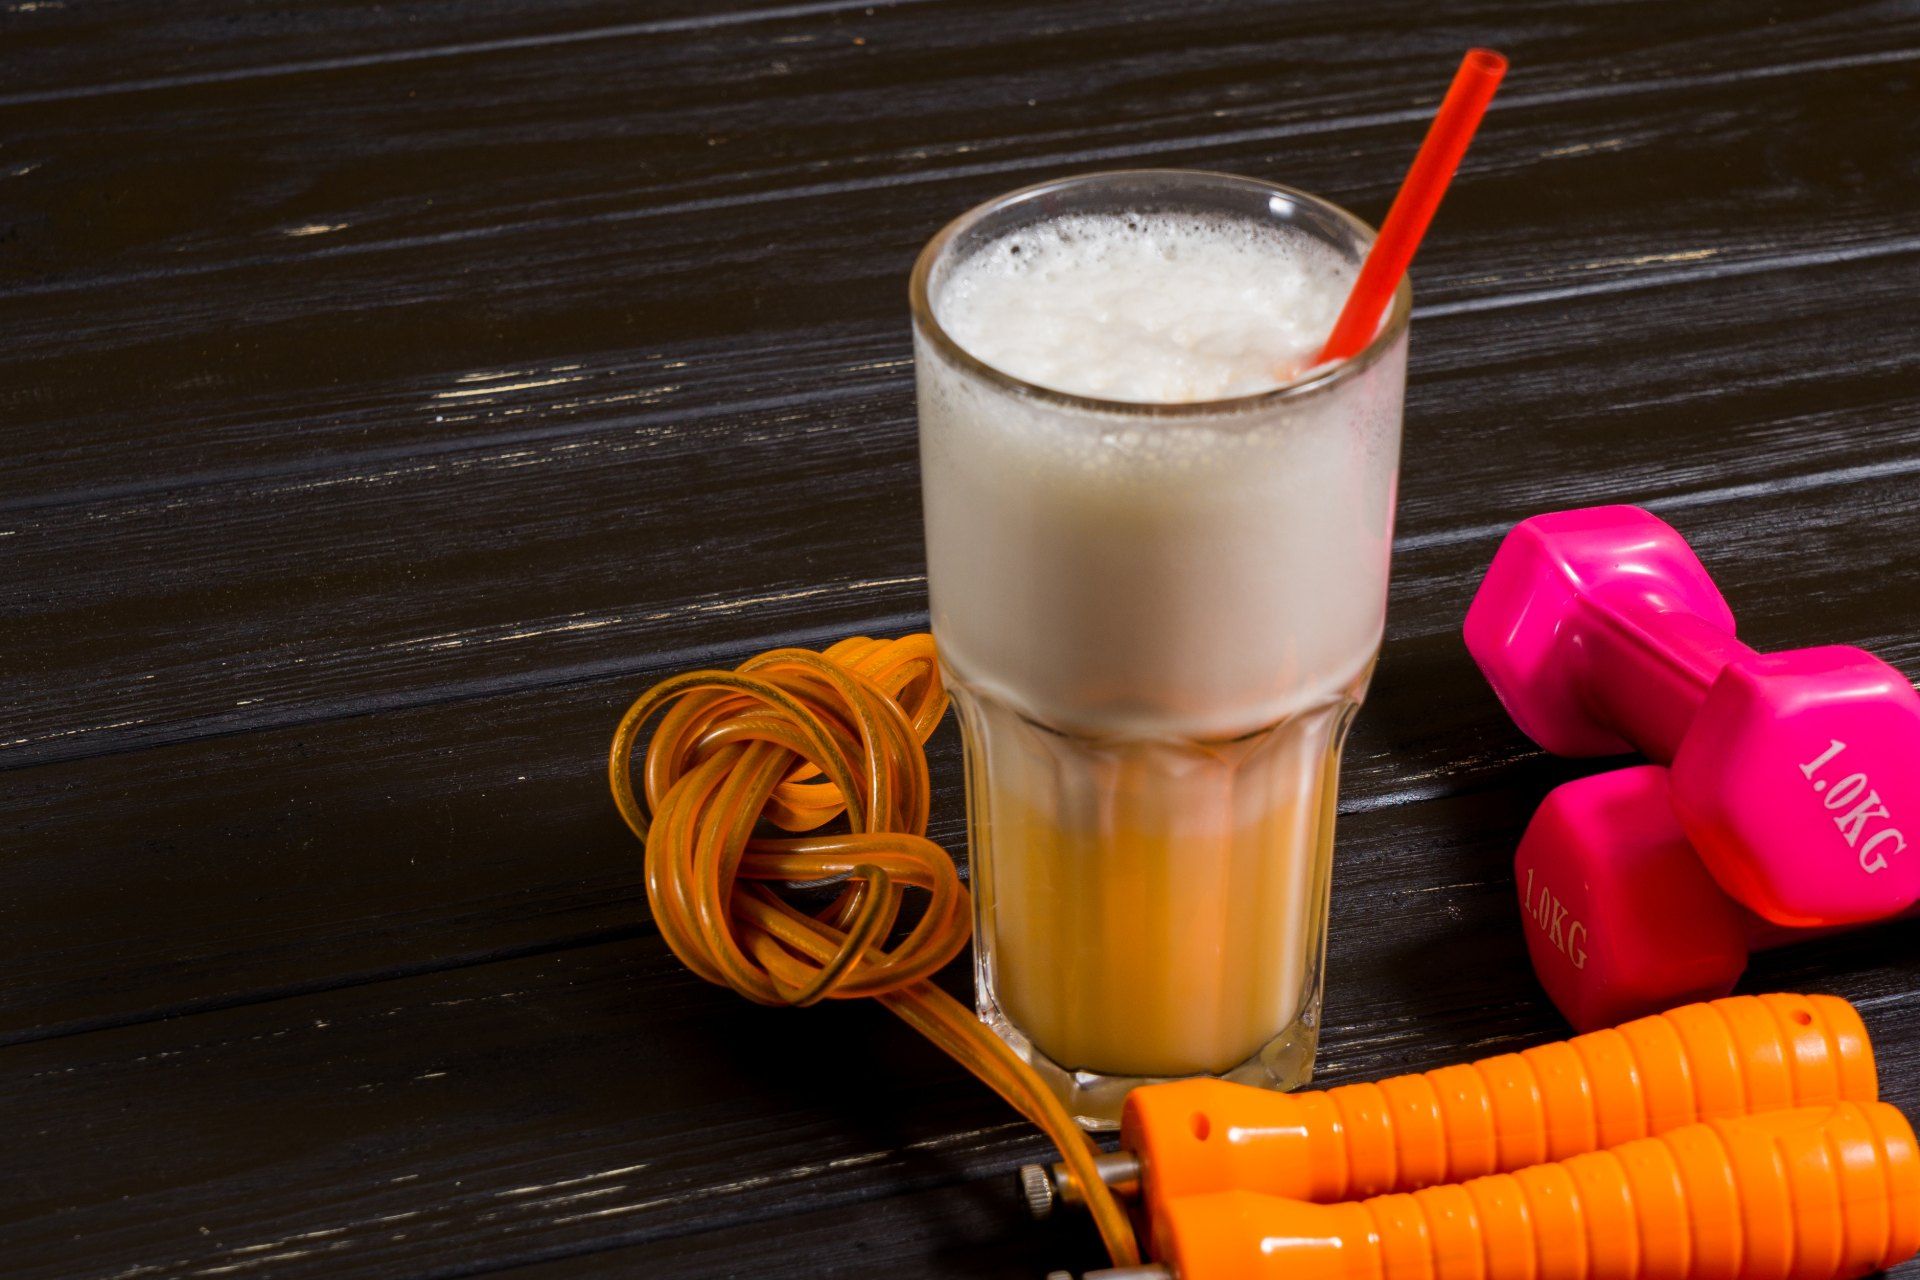 A fitness shake in a glass next to hand weights and other exercise equipment - Core Power protein shake